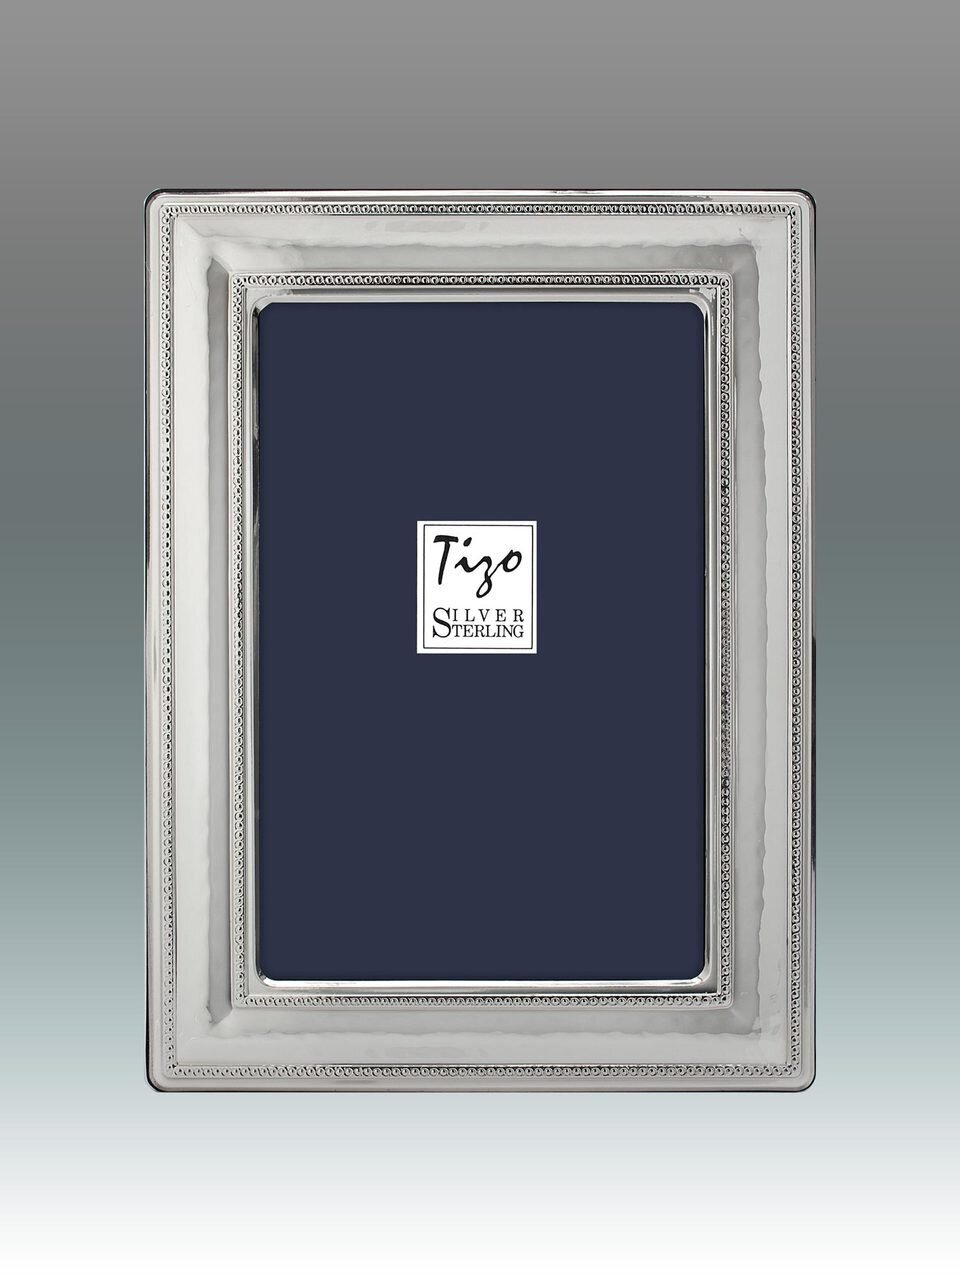 Tizo Pretty Beads 8 x 10 Inch Sterling Silver Picture Frame